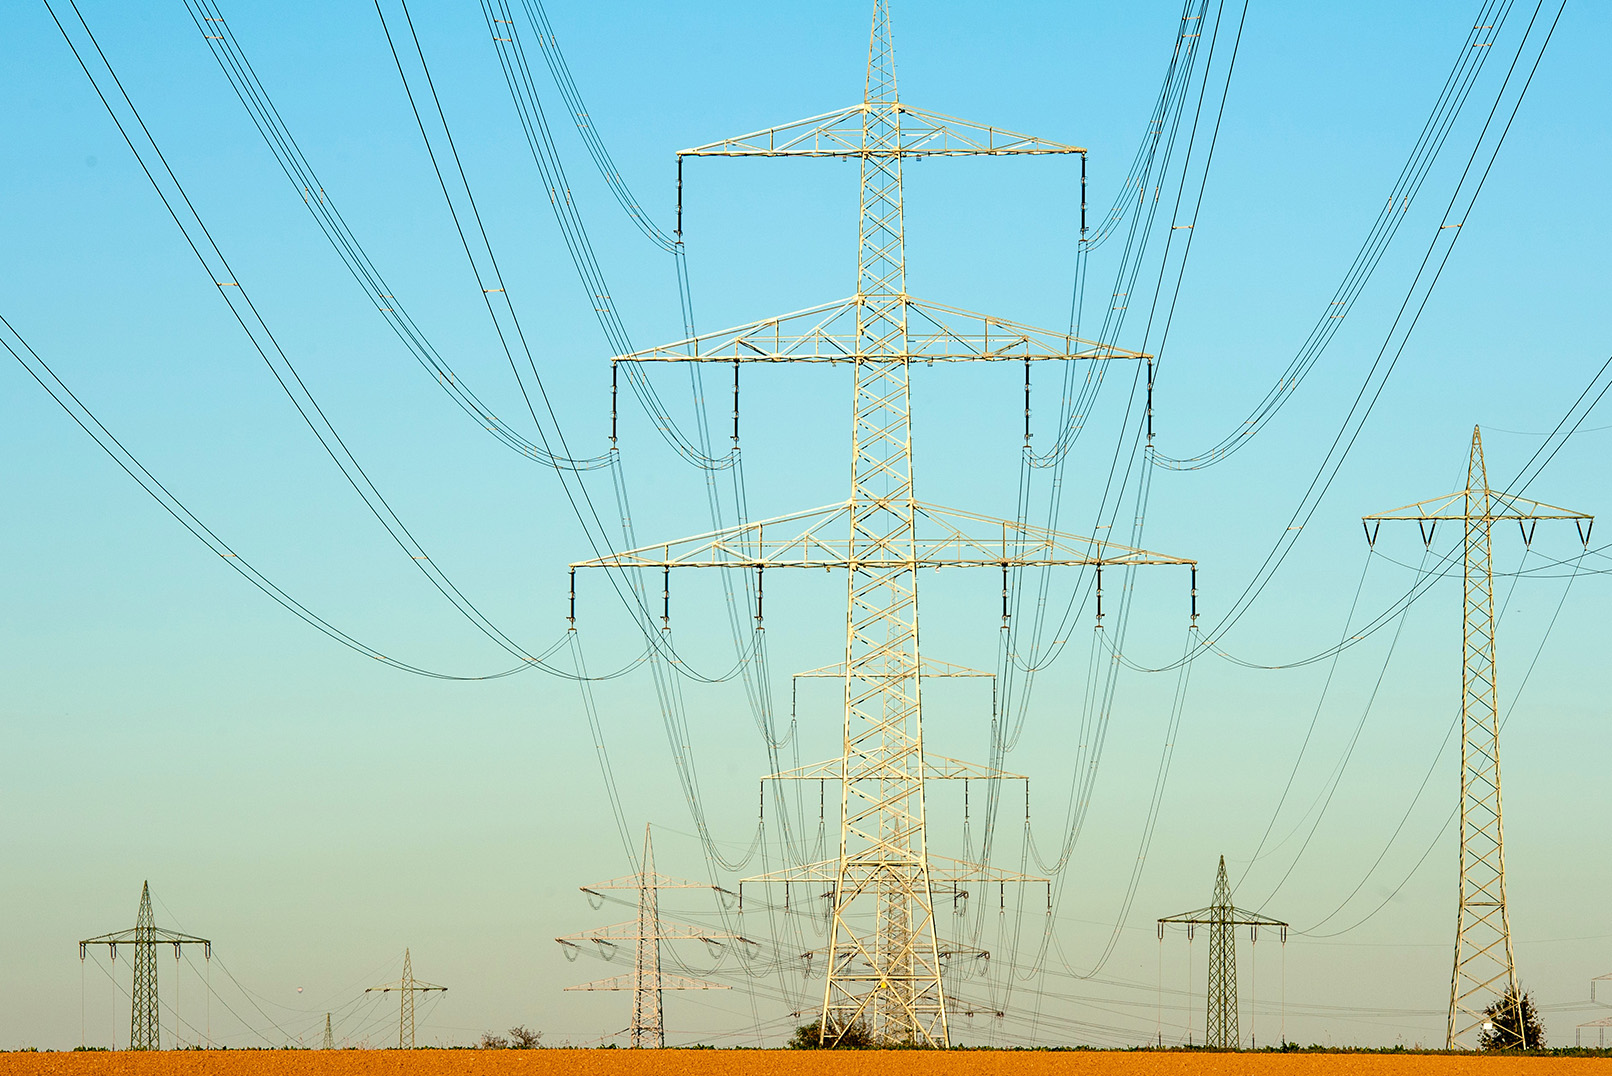 Large electricity pylon with three electricity pylons in the background with a bright blue coloured sky.